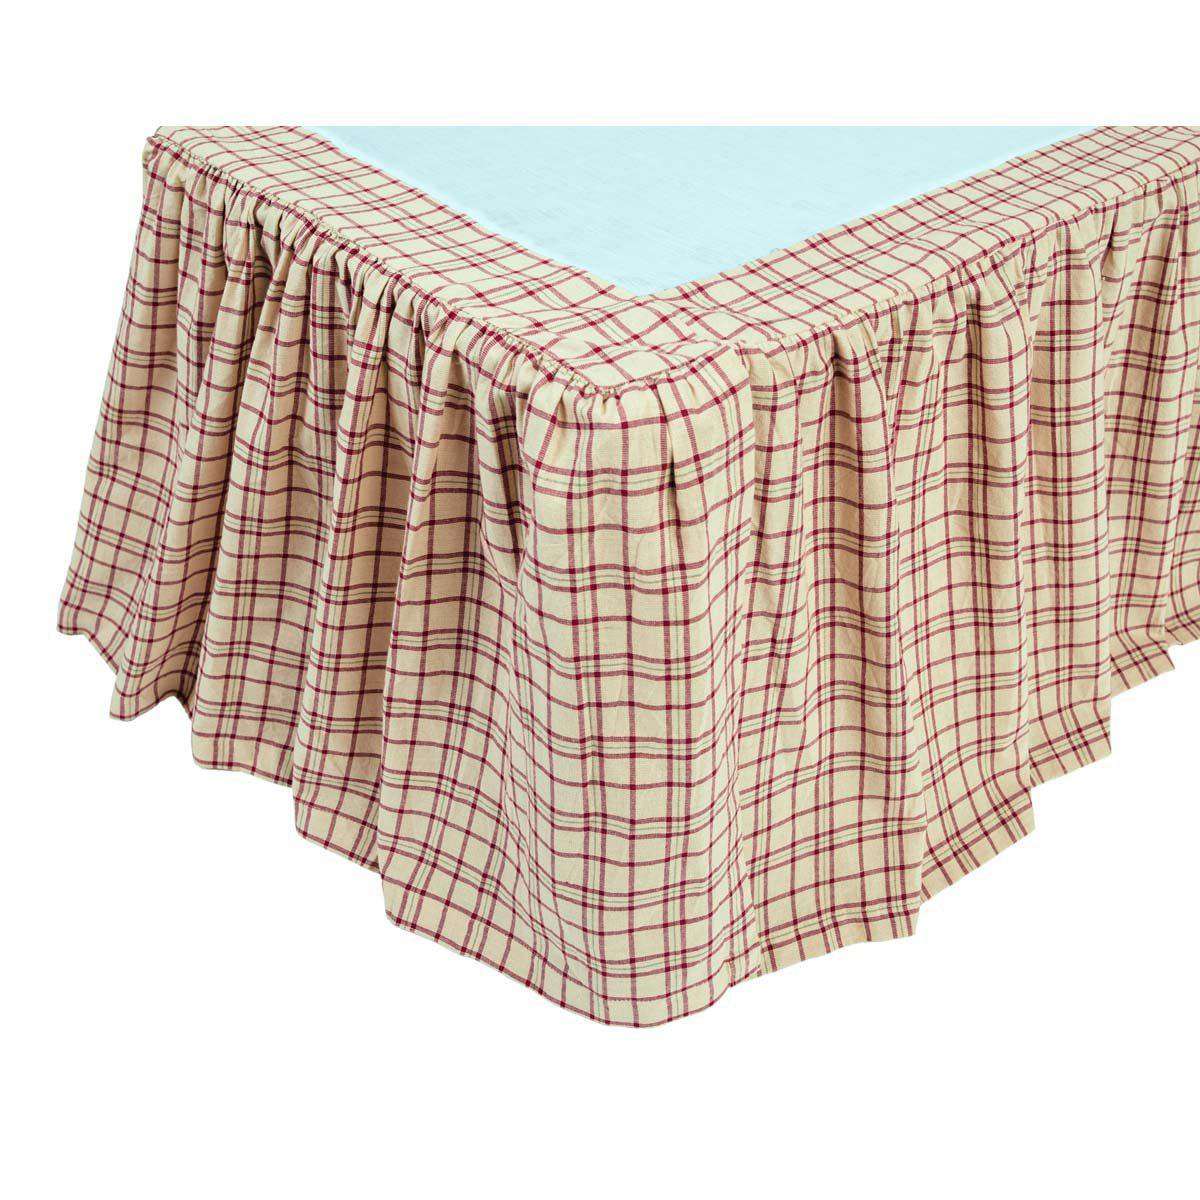 Tacoma Bed Skirts VHC Brands - The Fox Decor